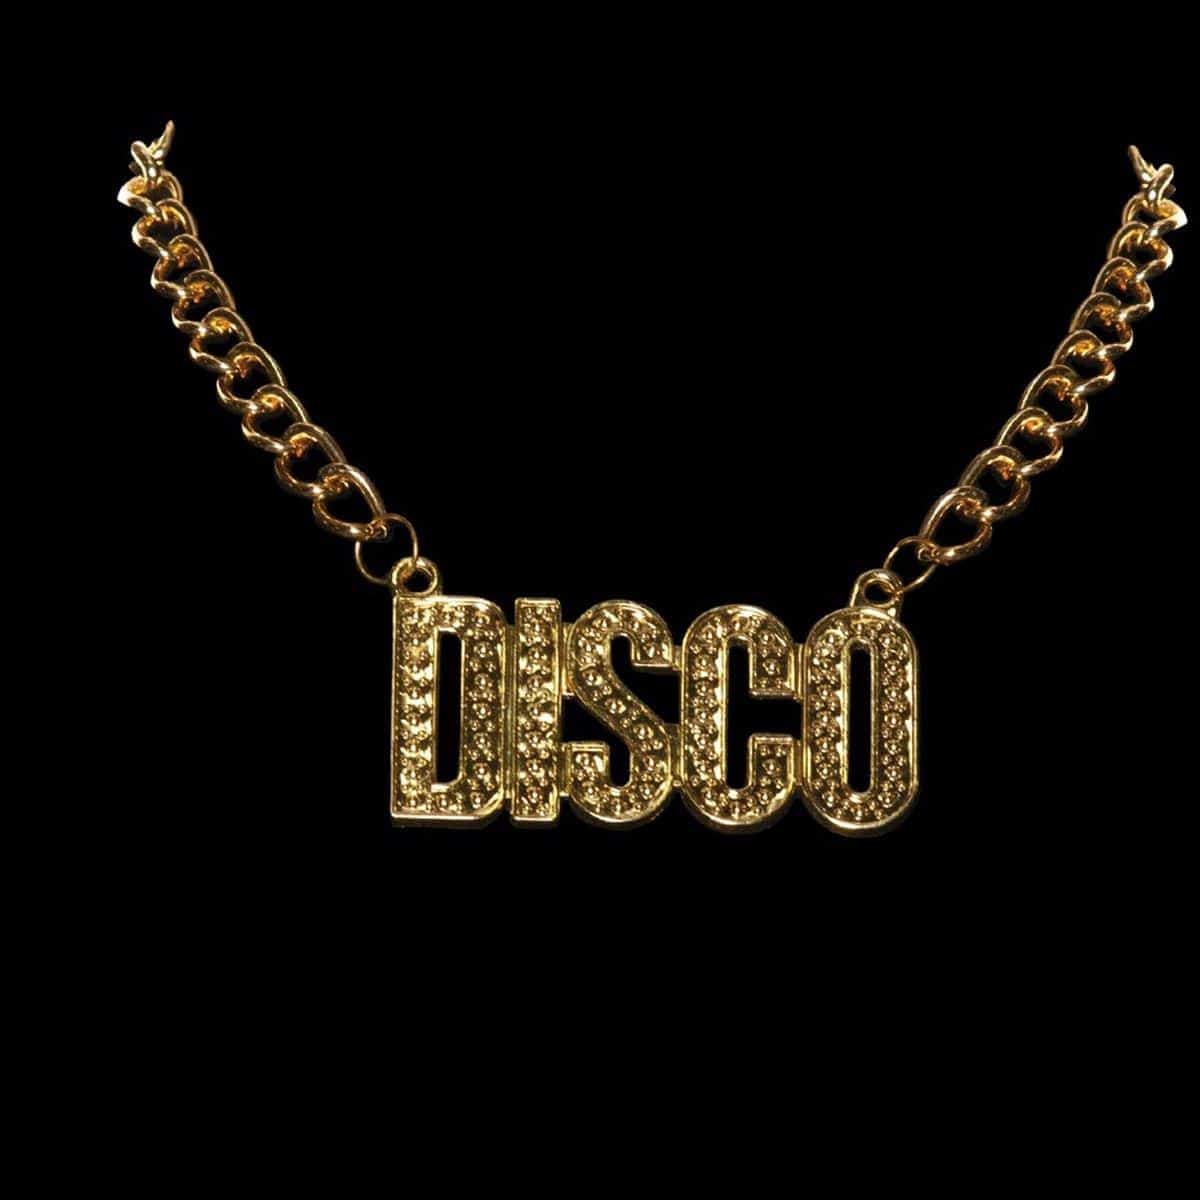 Buy Costume Accessories Disco chain necklace sold at Party Expert